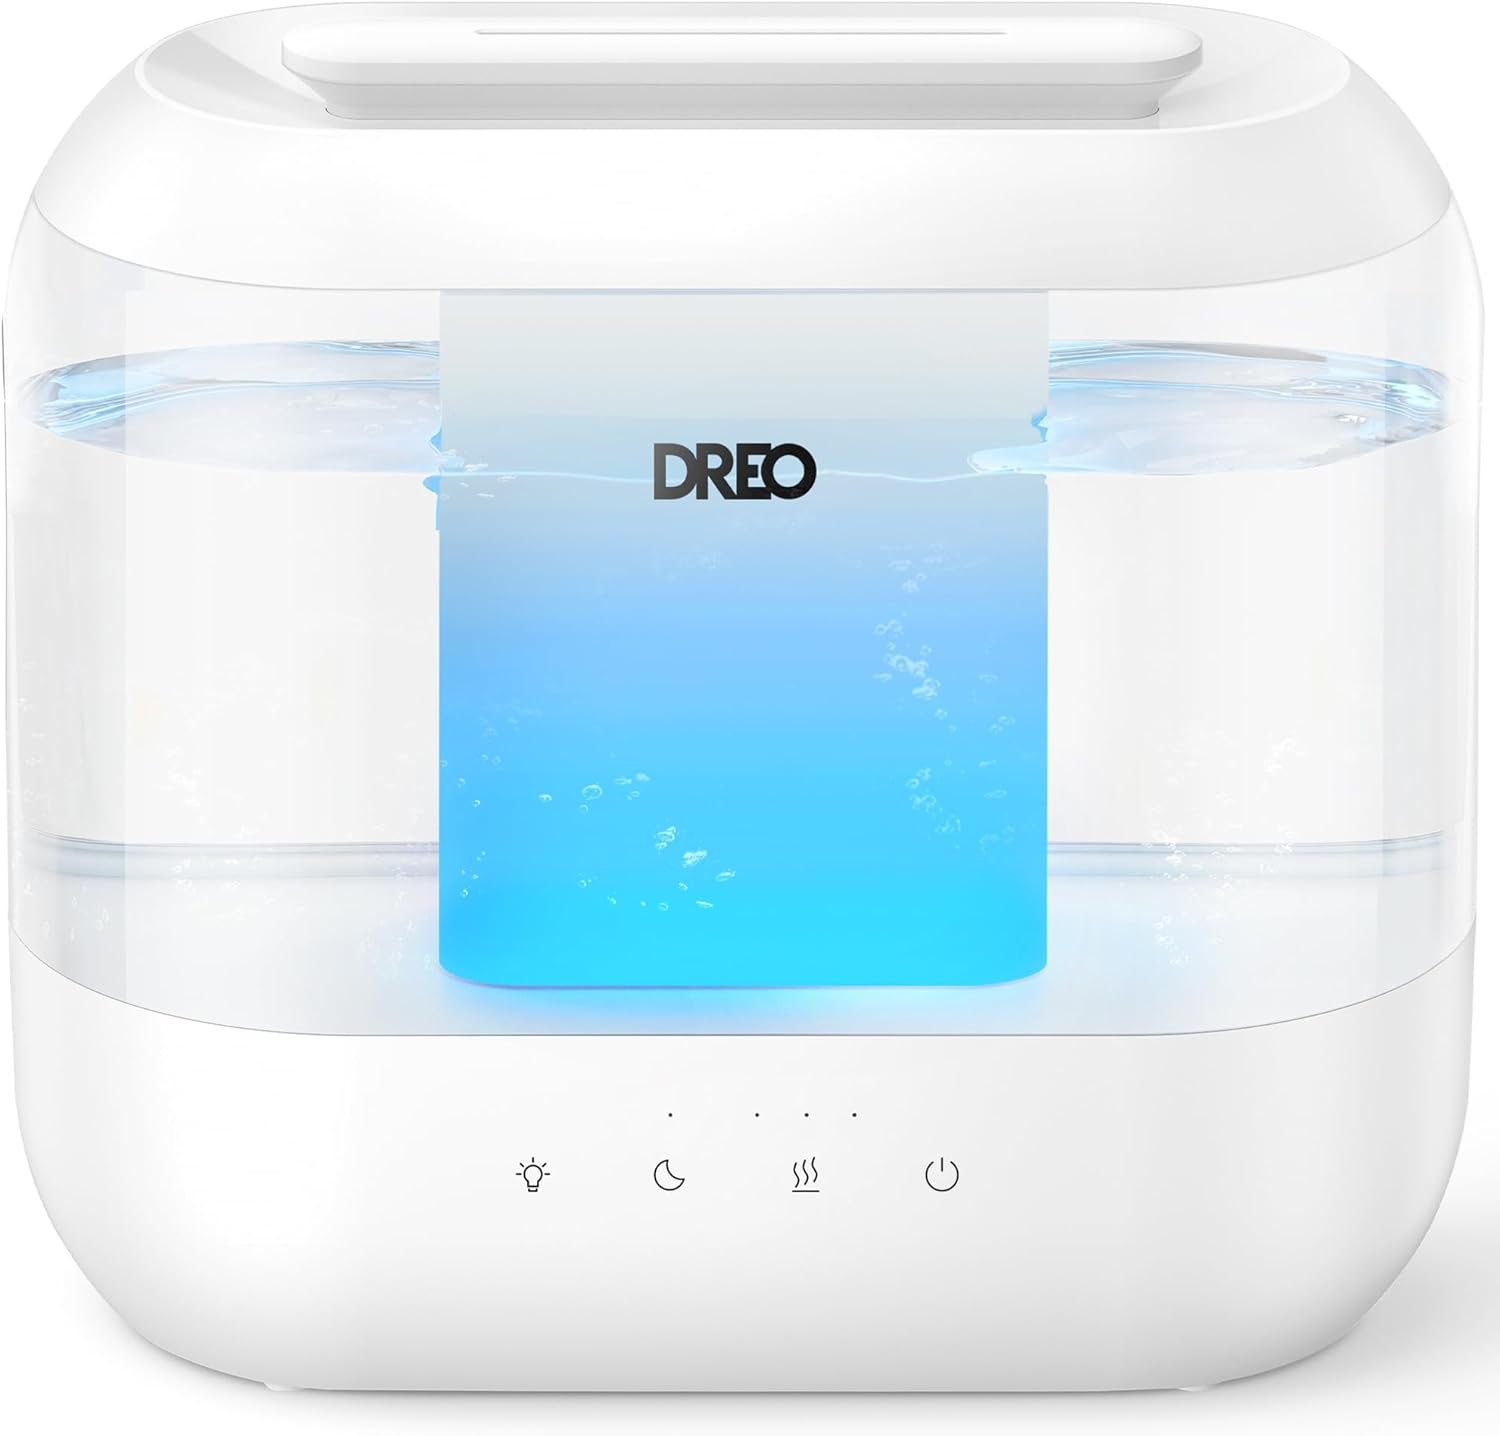 Dreo Humidifier Review